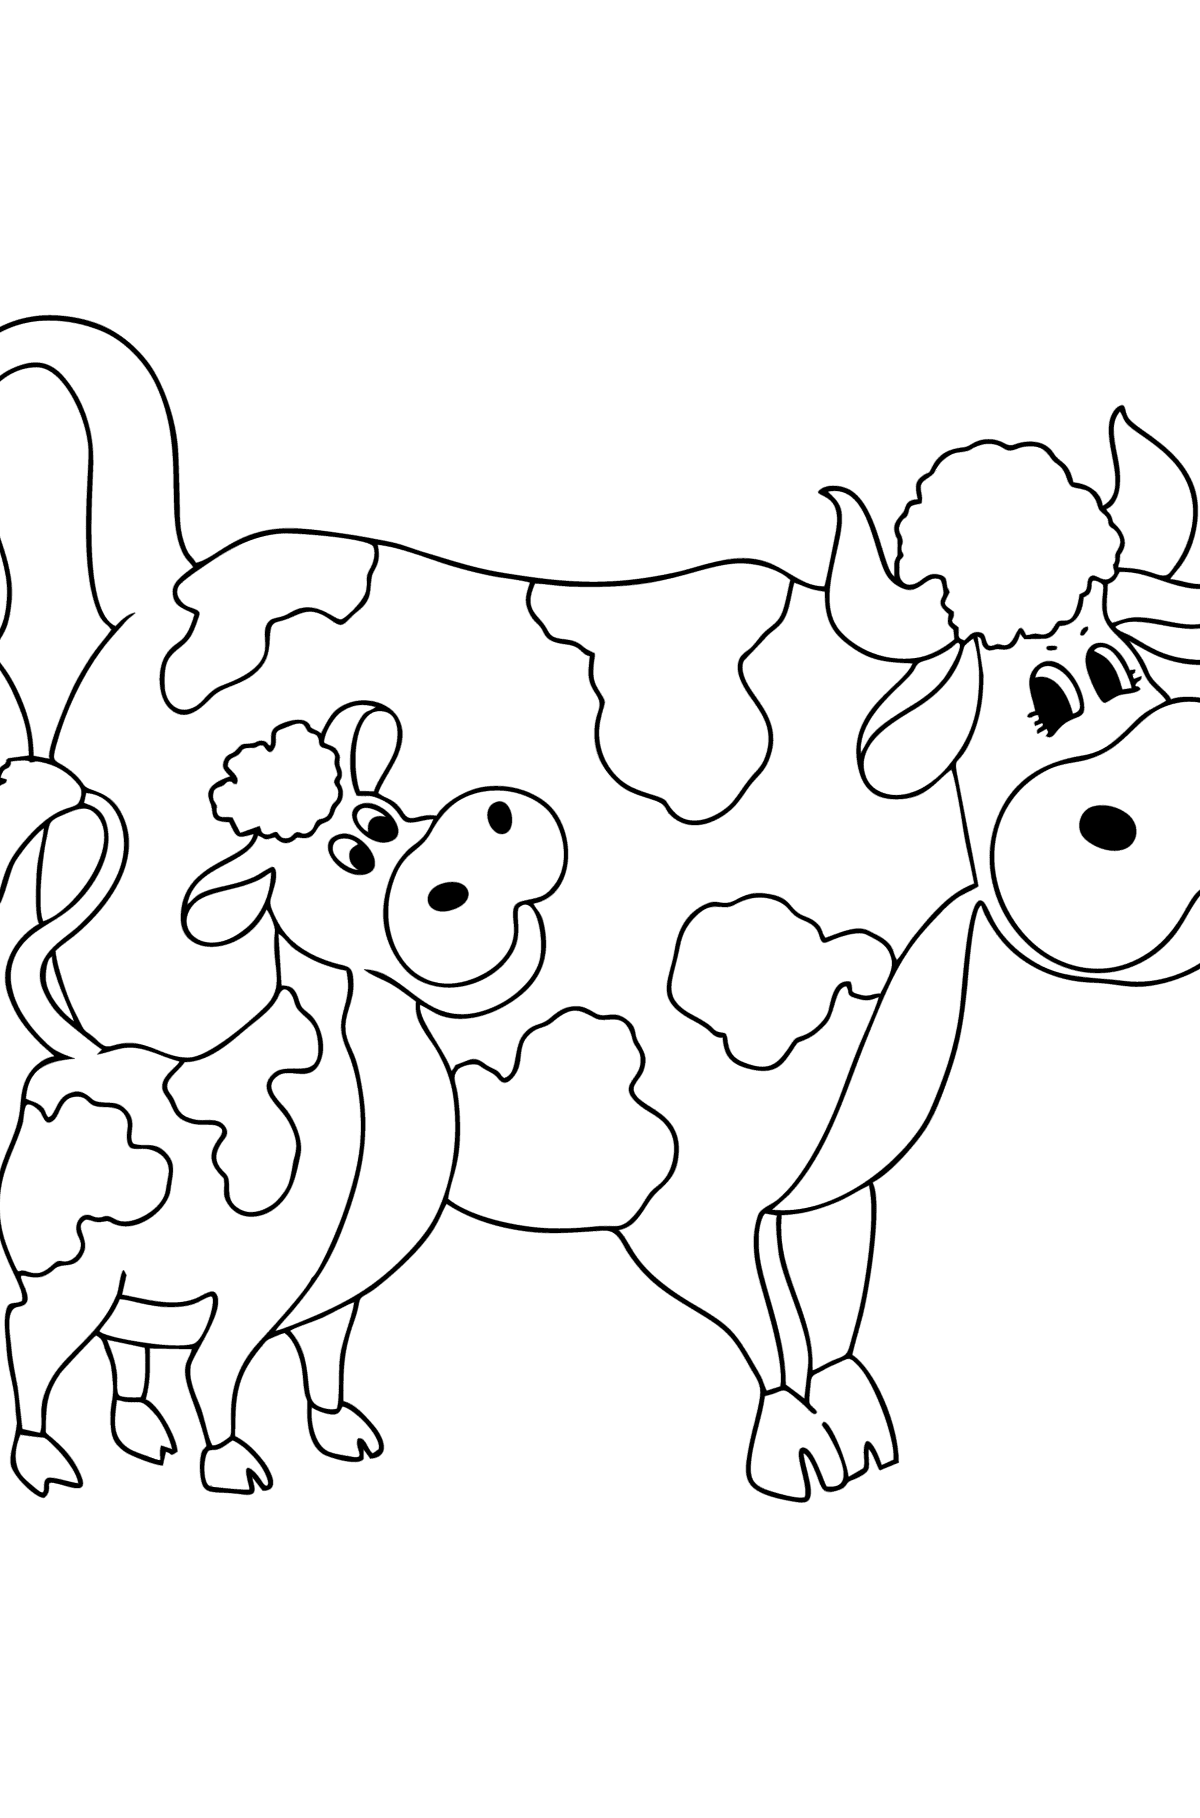 Cow and calf coloring pages - Coloring Pages for Kids